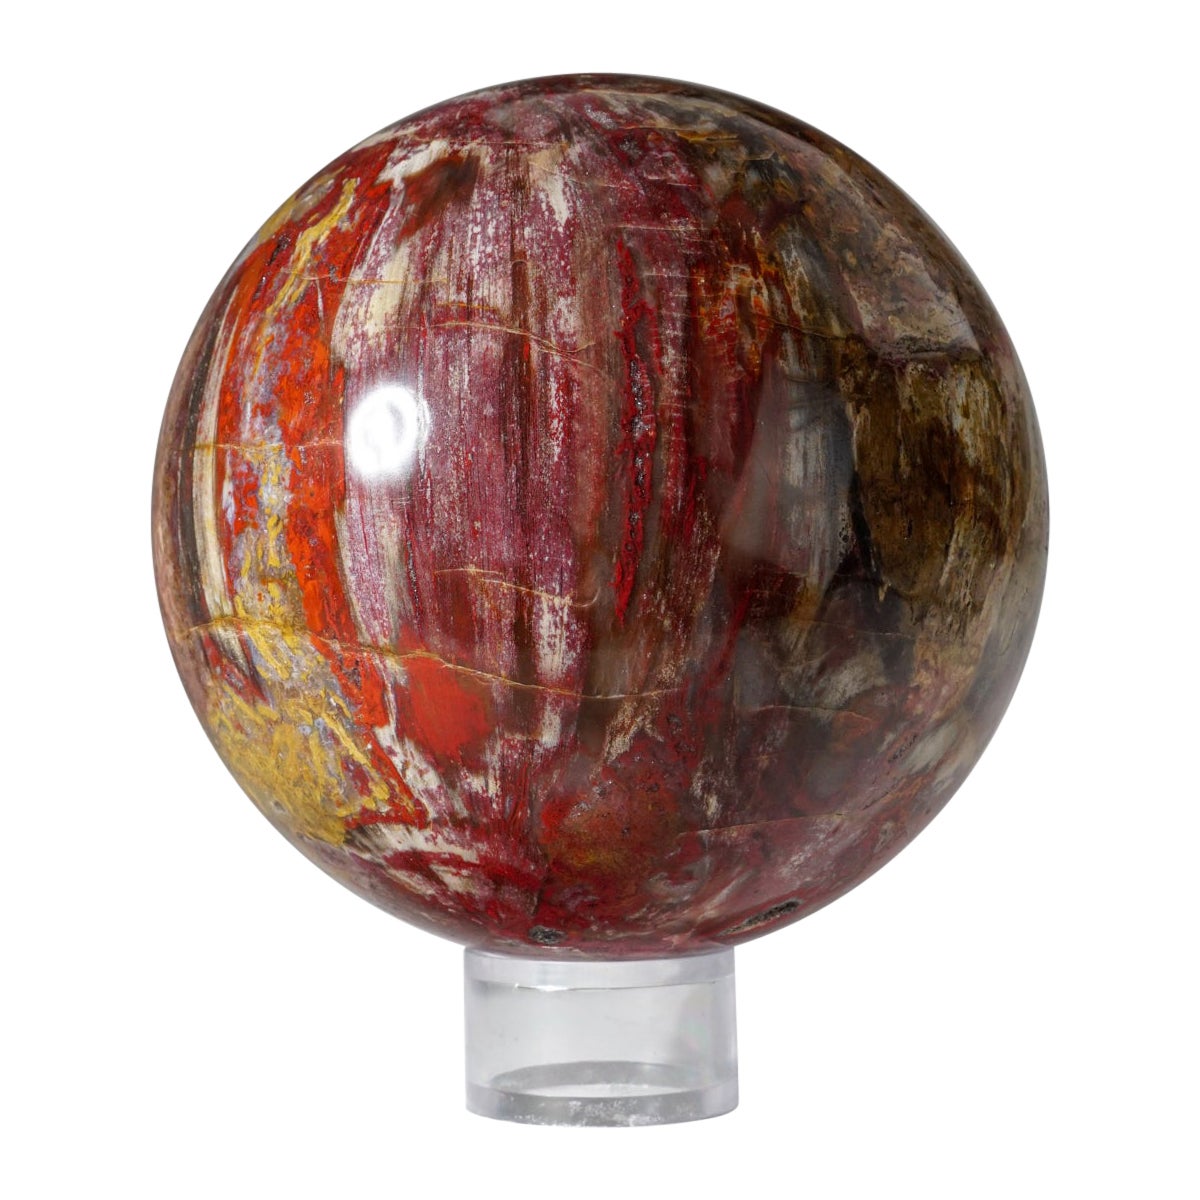 Polished Petrified Wood Sphere from Madagascar (5.5", 7.3 lbs)